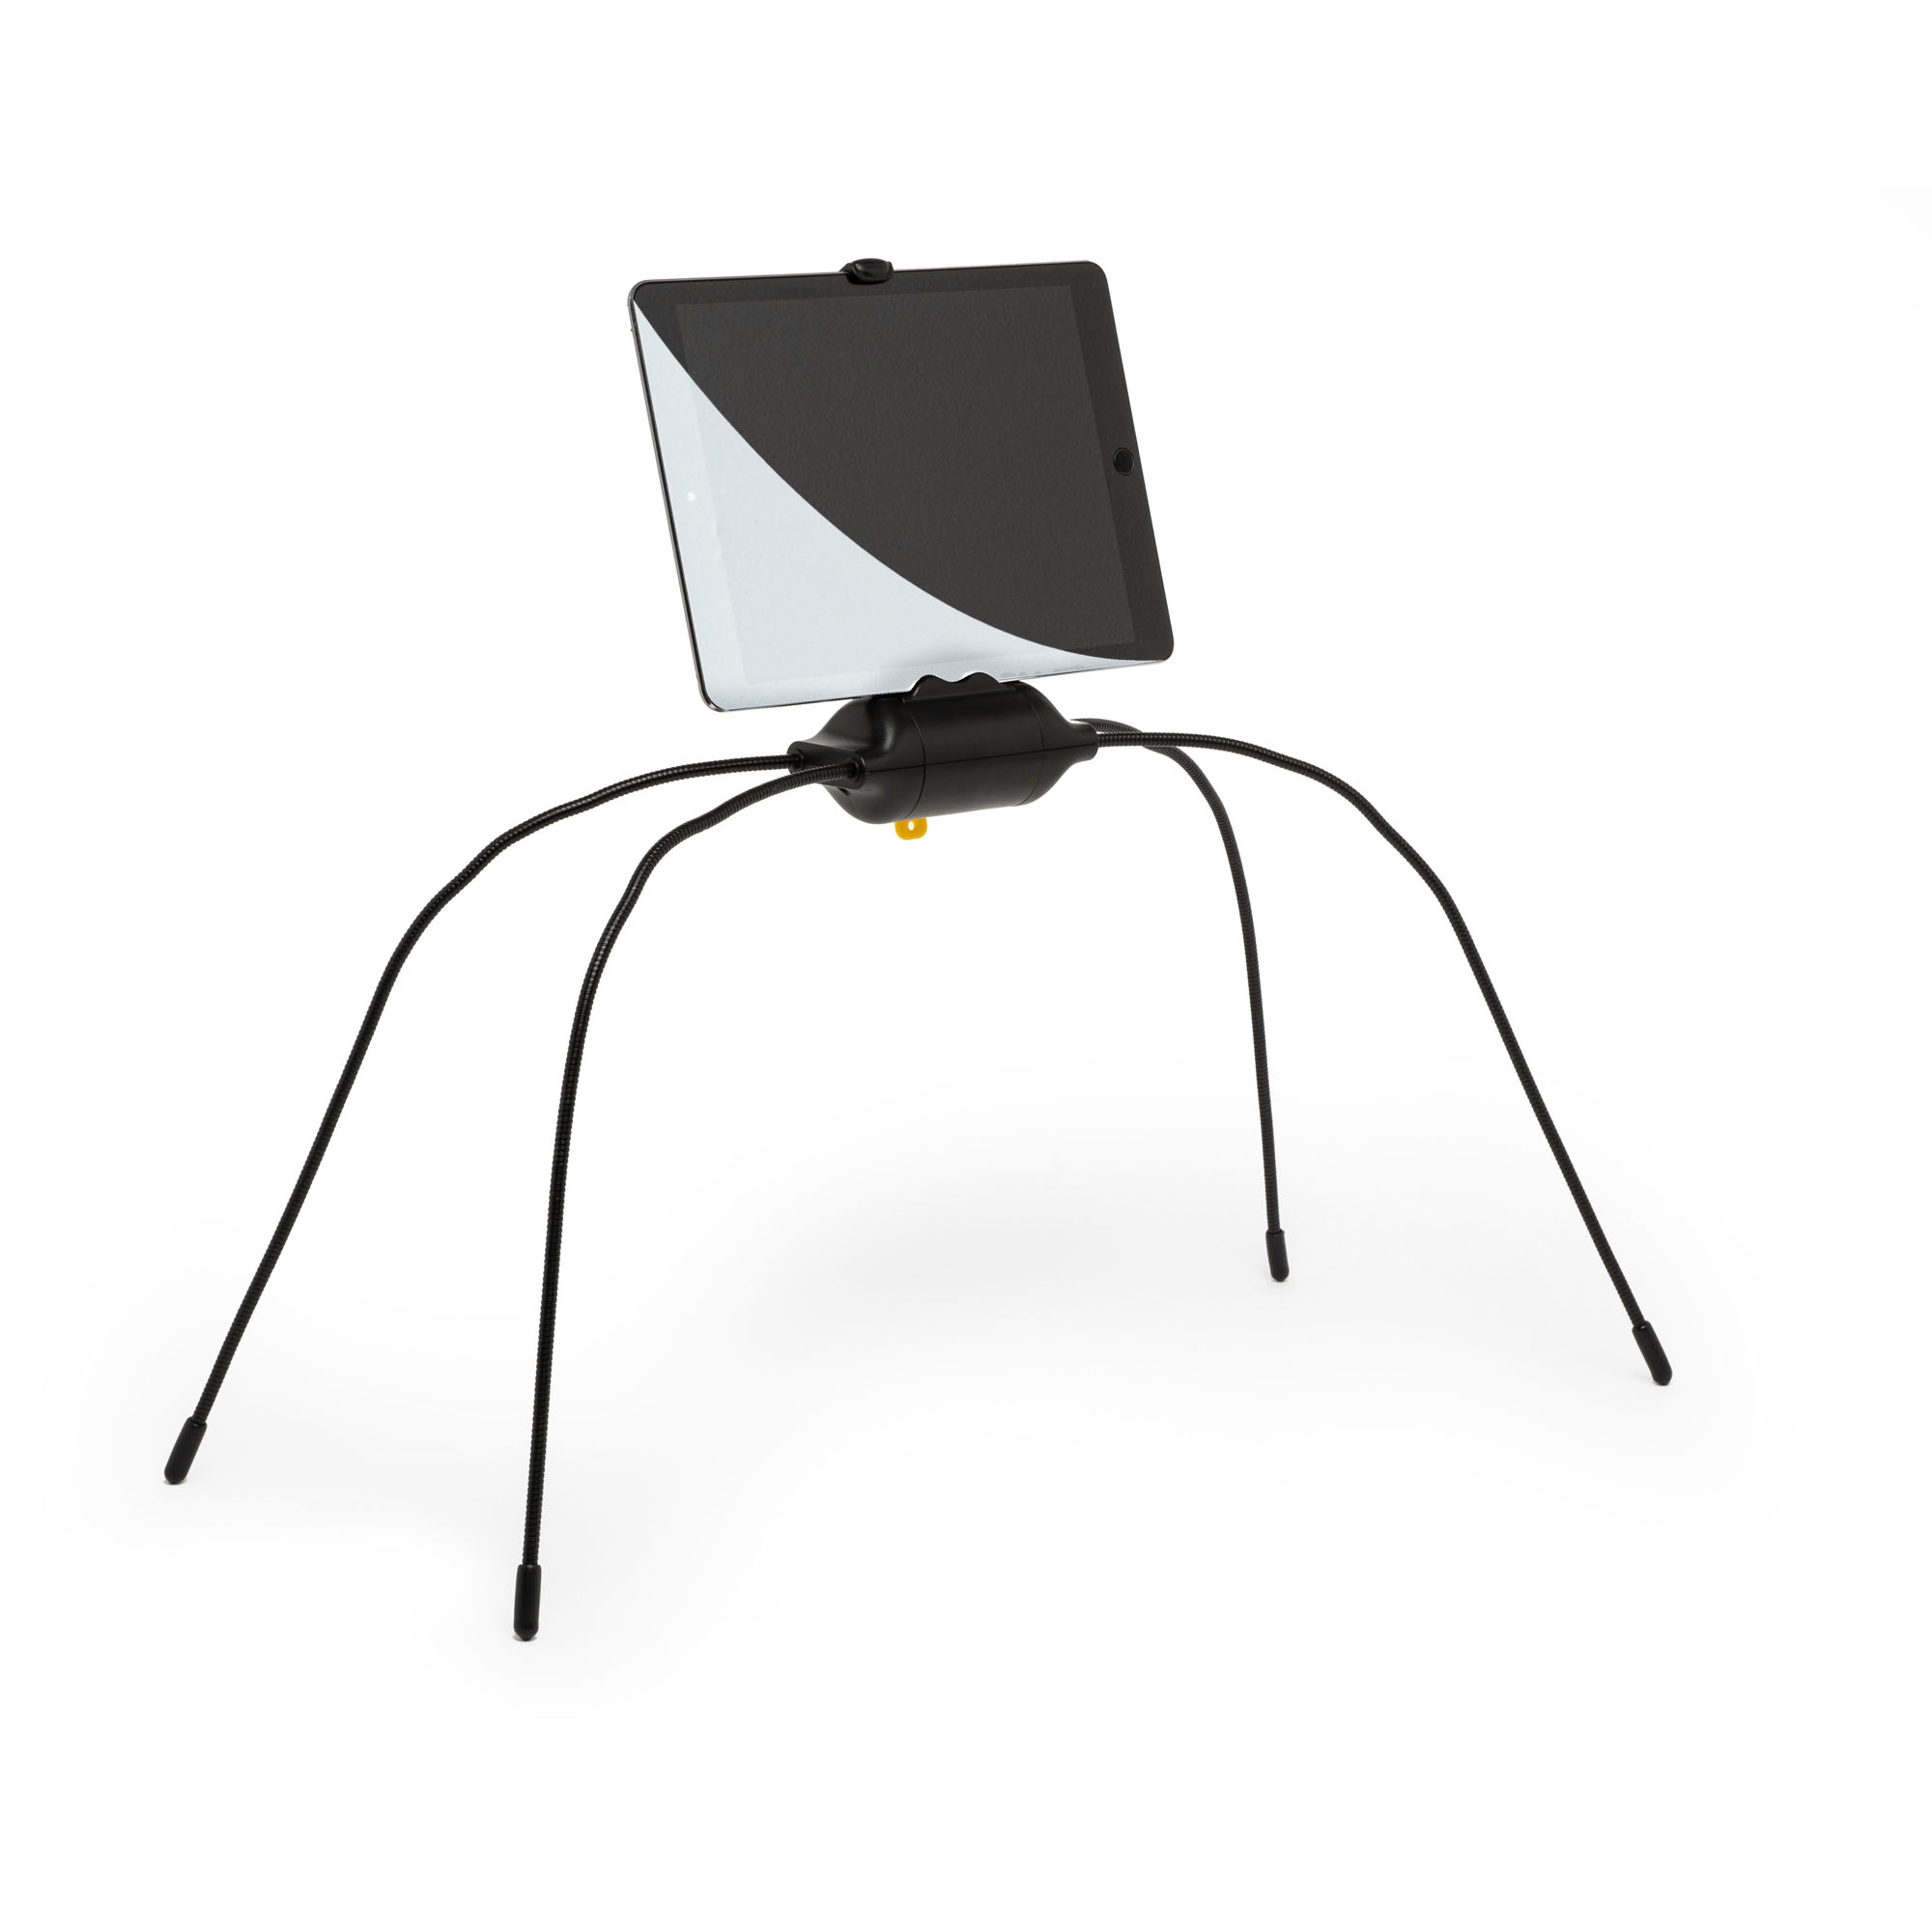 Supporto per tablet Spider Stand, , large